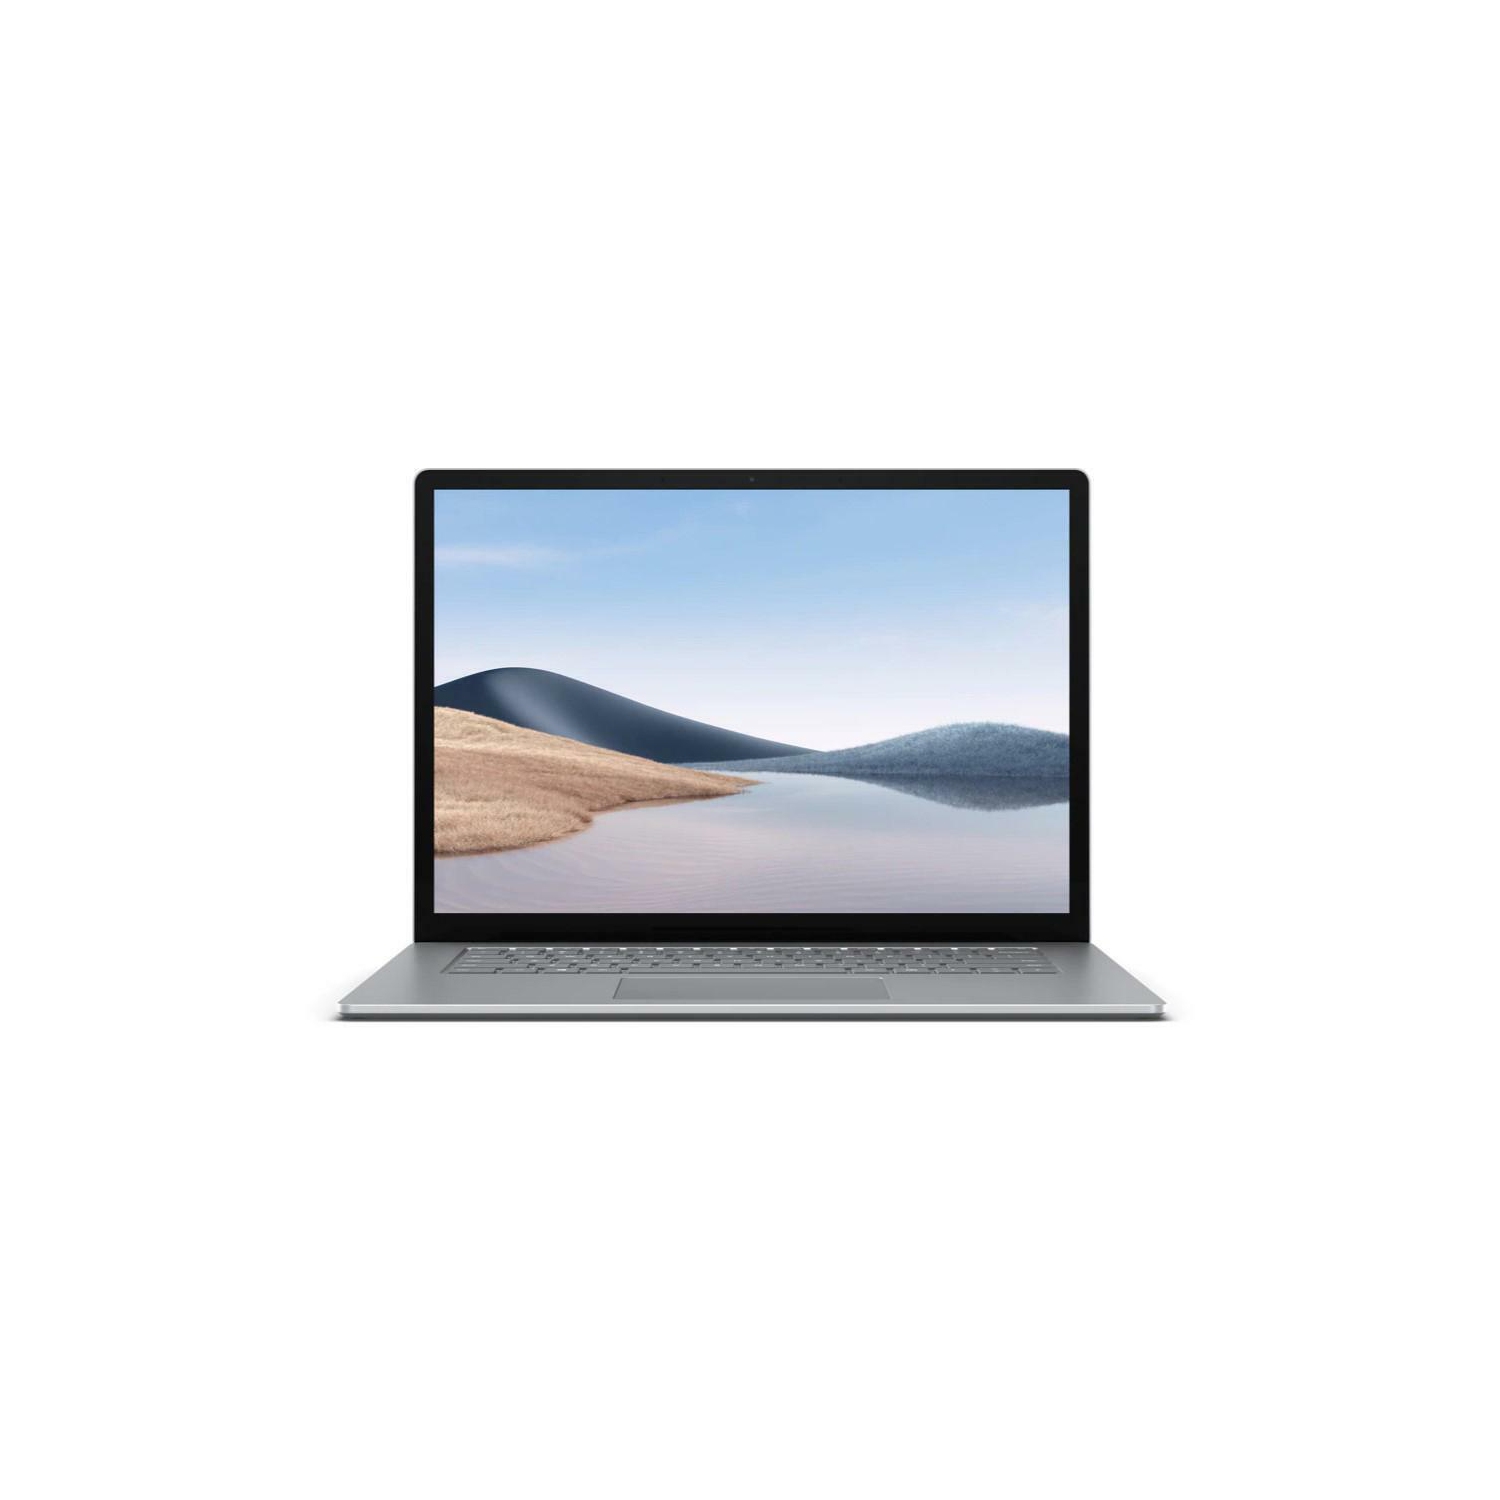 Microsoft Surface Laptop 4 13.5 inch Touch i5 Windows 10 Pro Refurbished (Excellent)